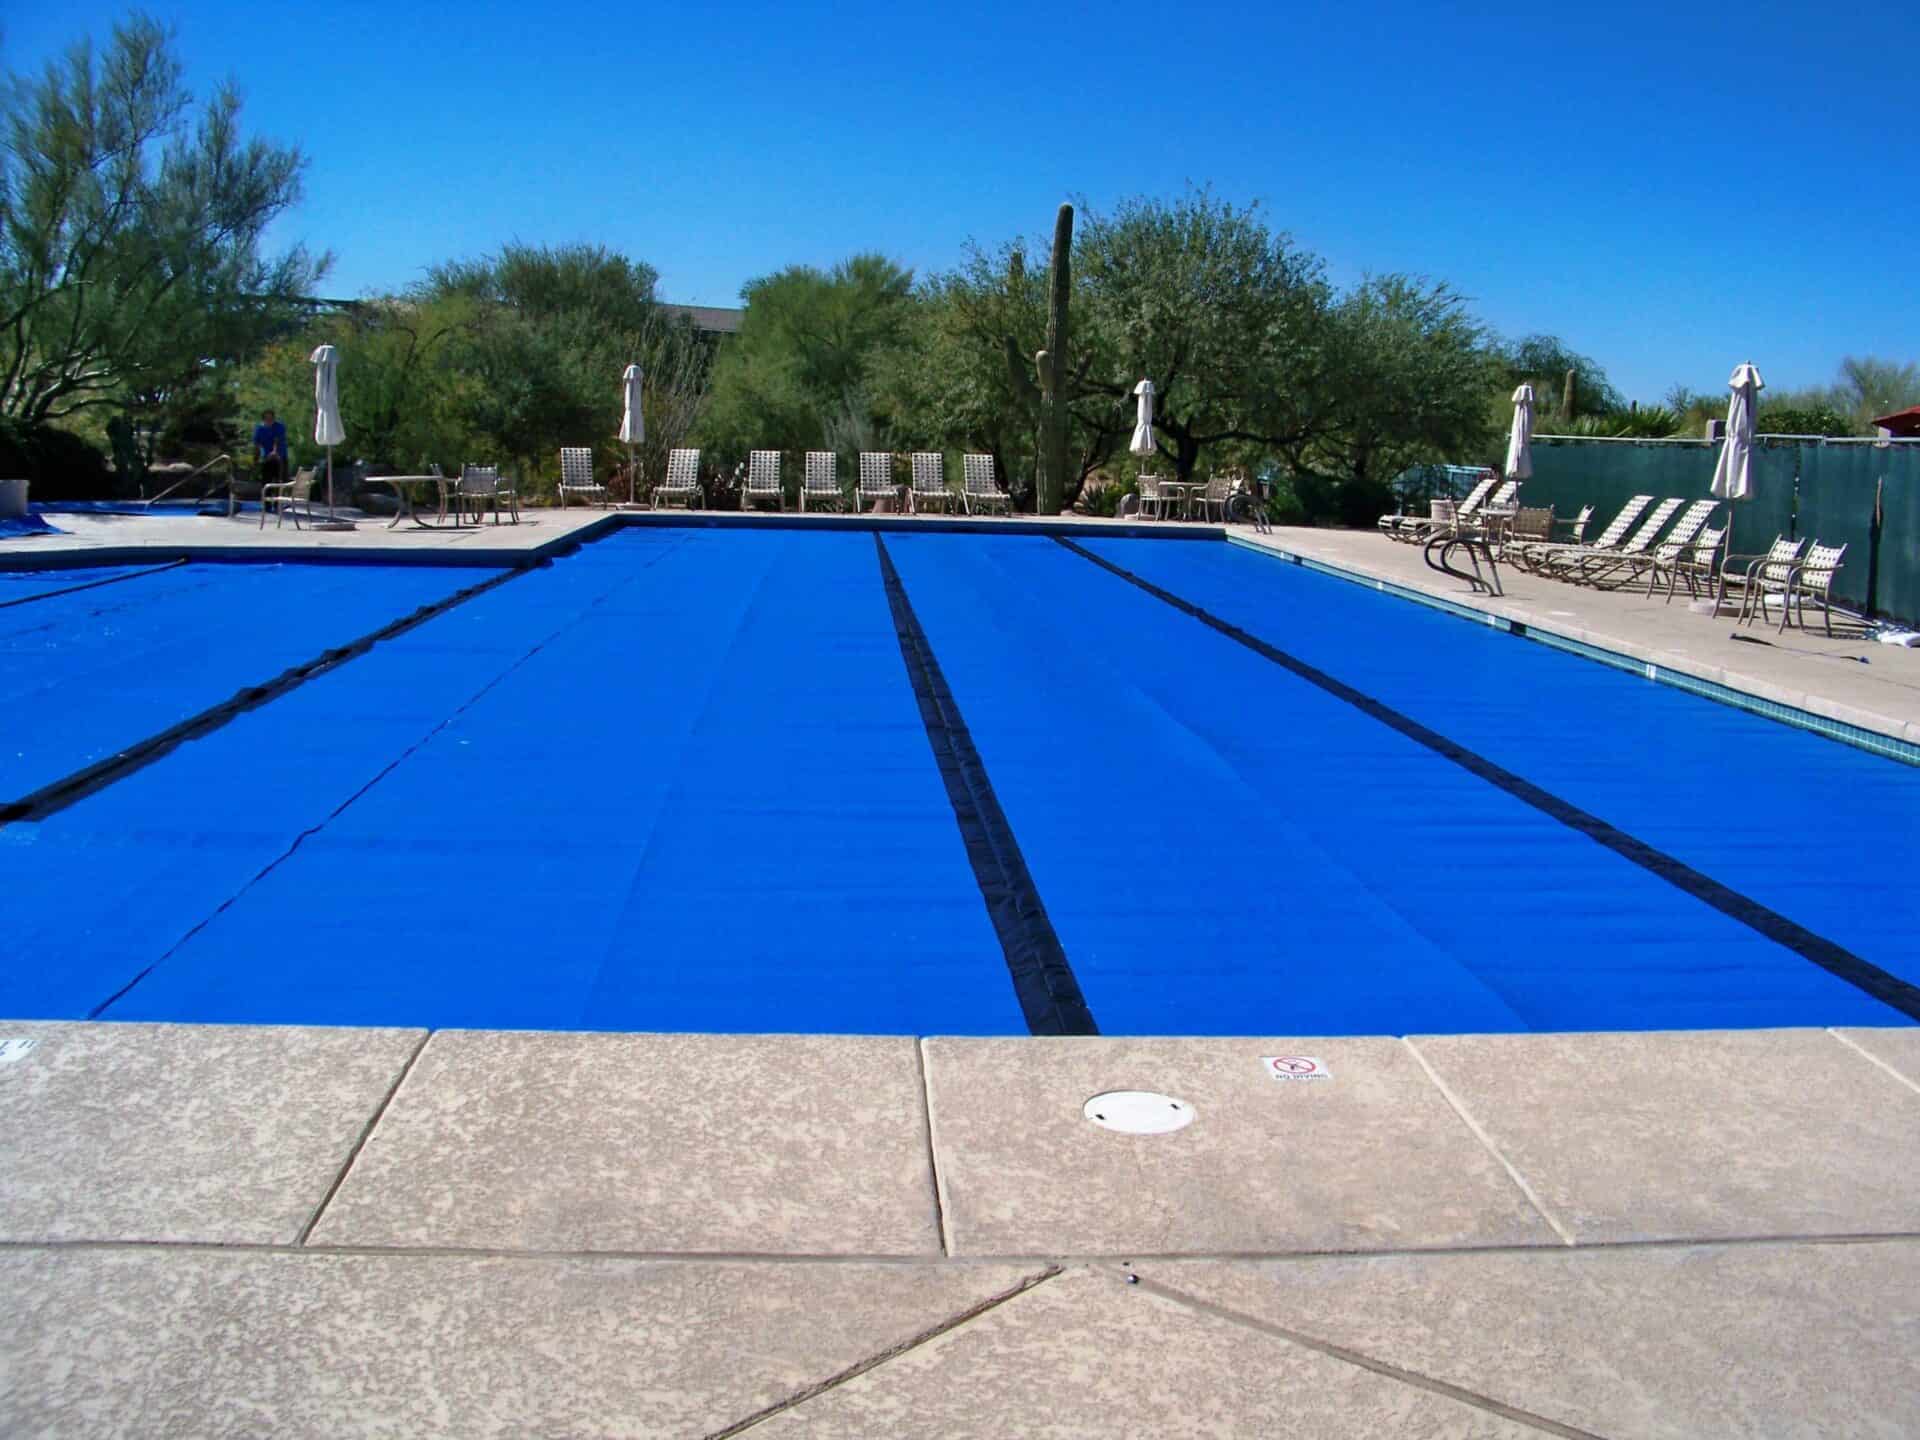 Pools Photo Gallery | Swimming pool coverings | Solar Safe Pool Covers